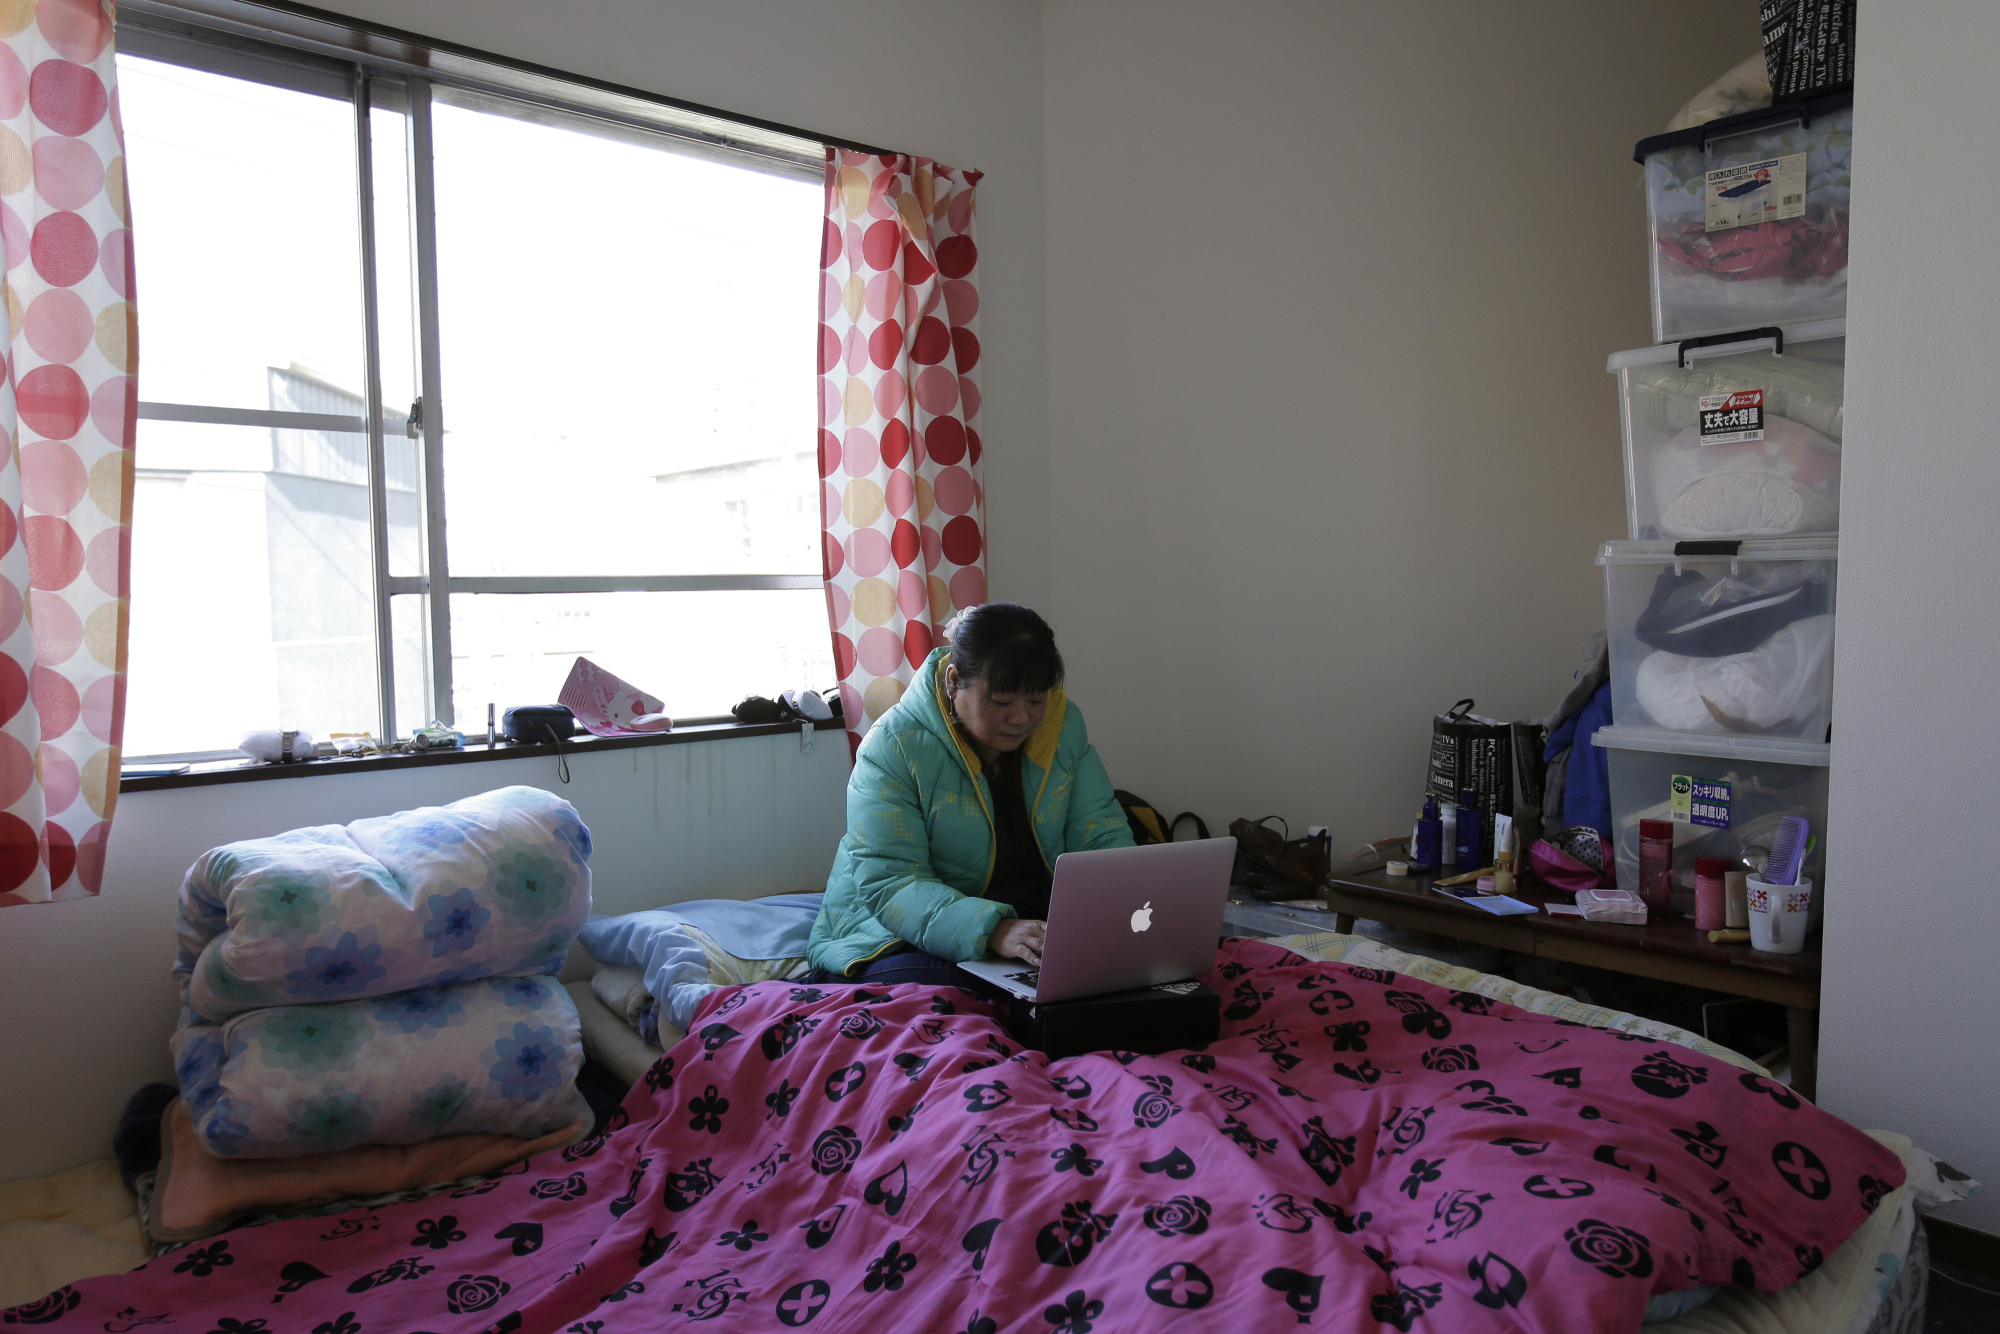 Chinese trainee Tang Xili uses a laptop computer in her room at a shelter managed by a local labor union in Hashima, Gifu Prefecture, in January last year. Japan has been heavily criticized for exploiting foreign trainees as cheap labor. | BLOOMBERG